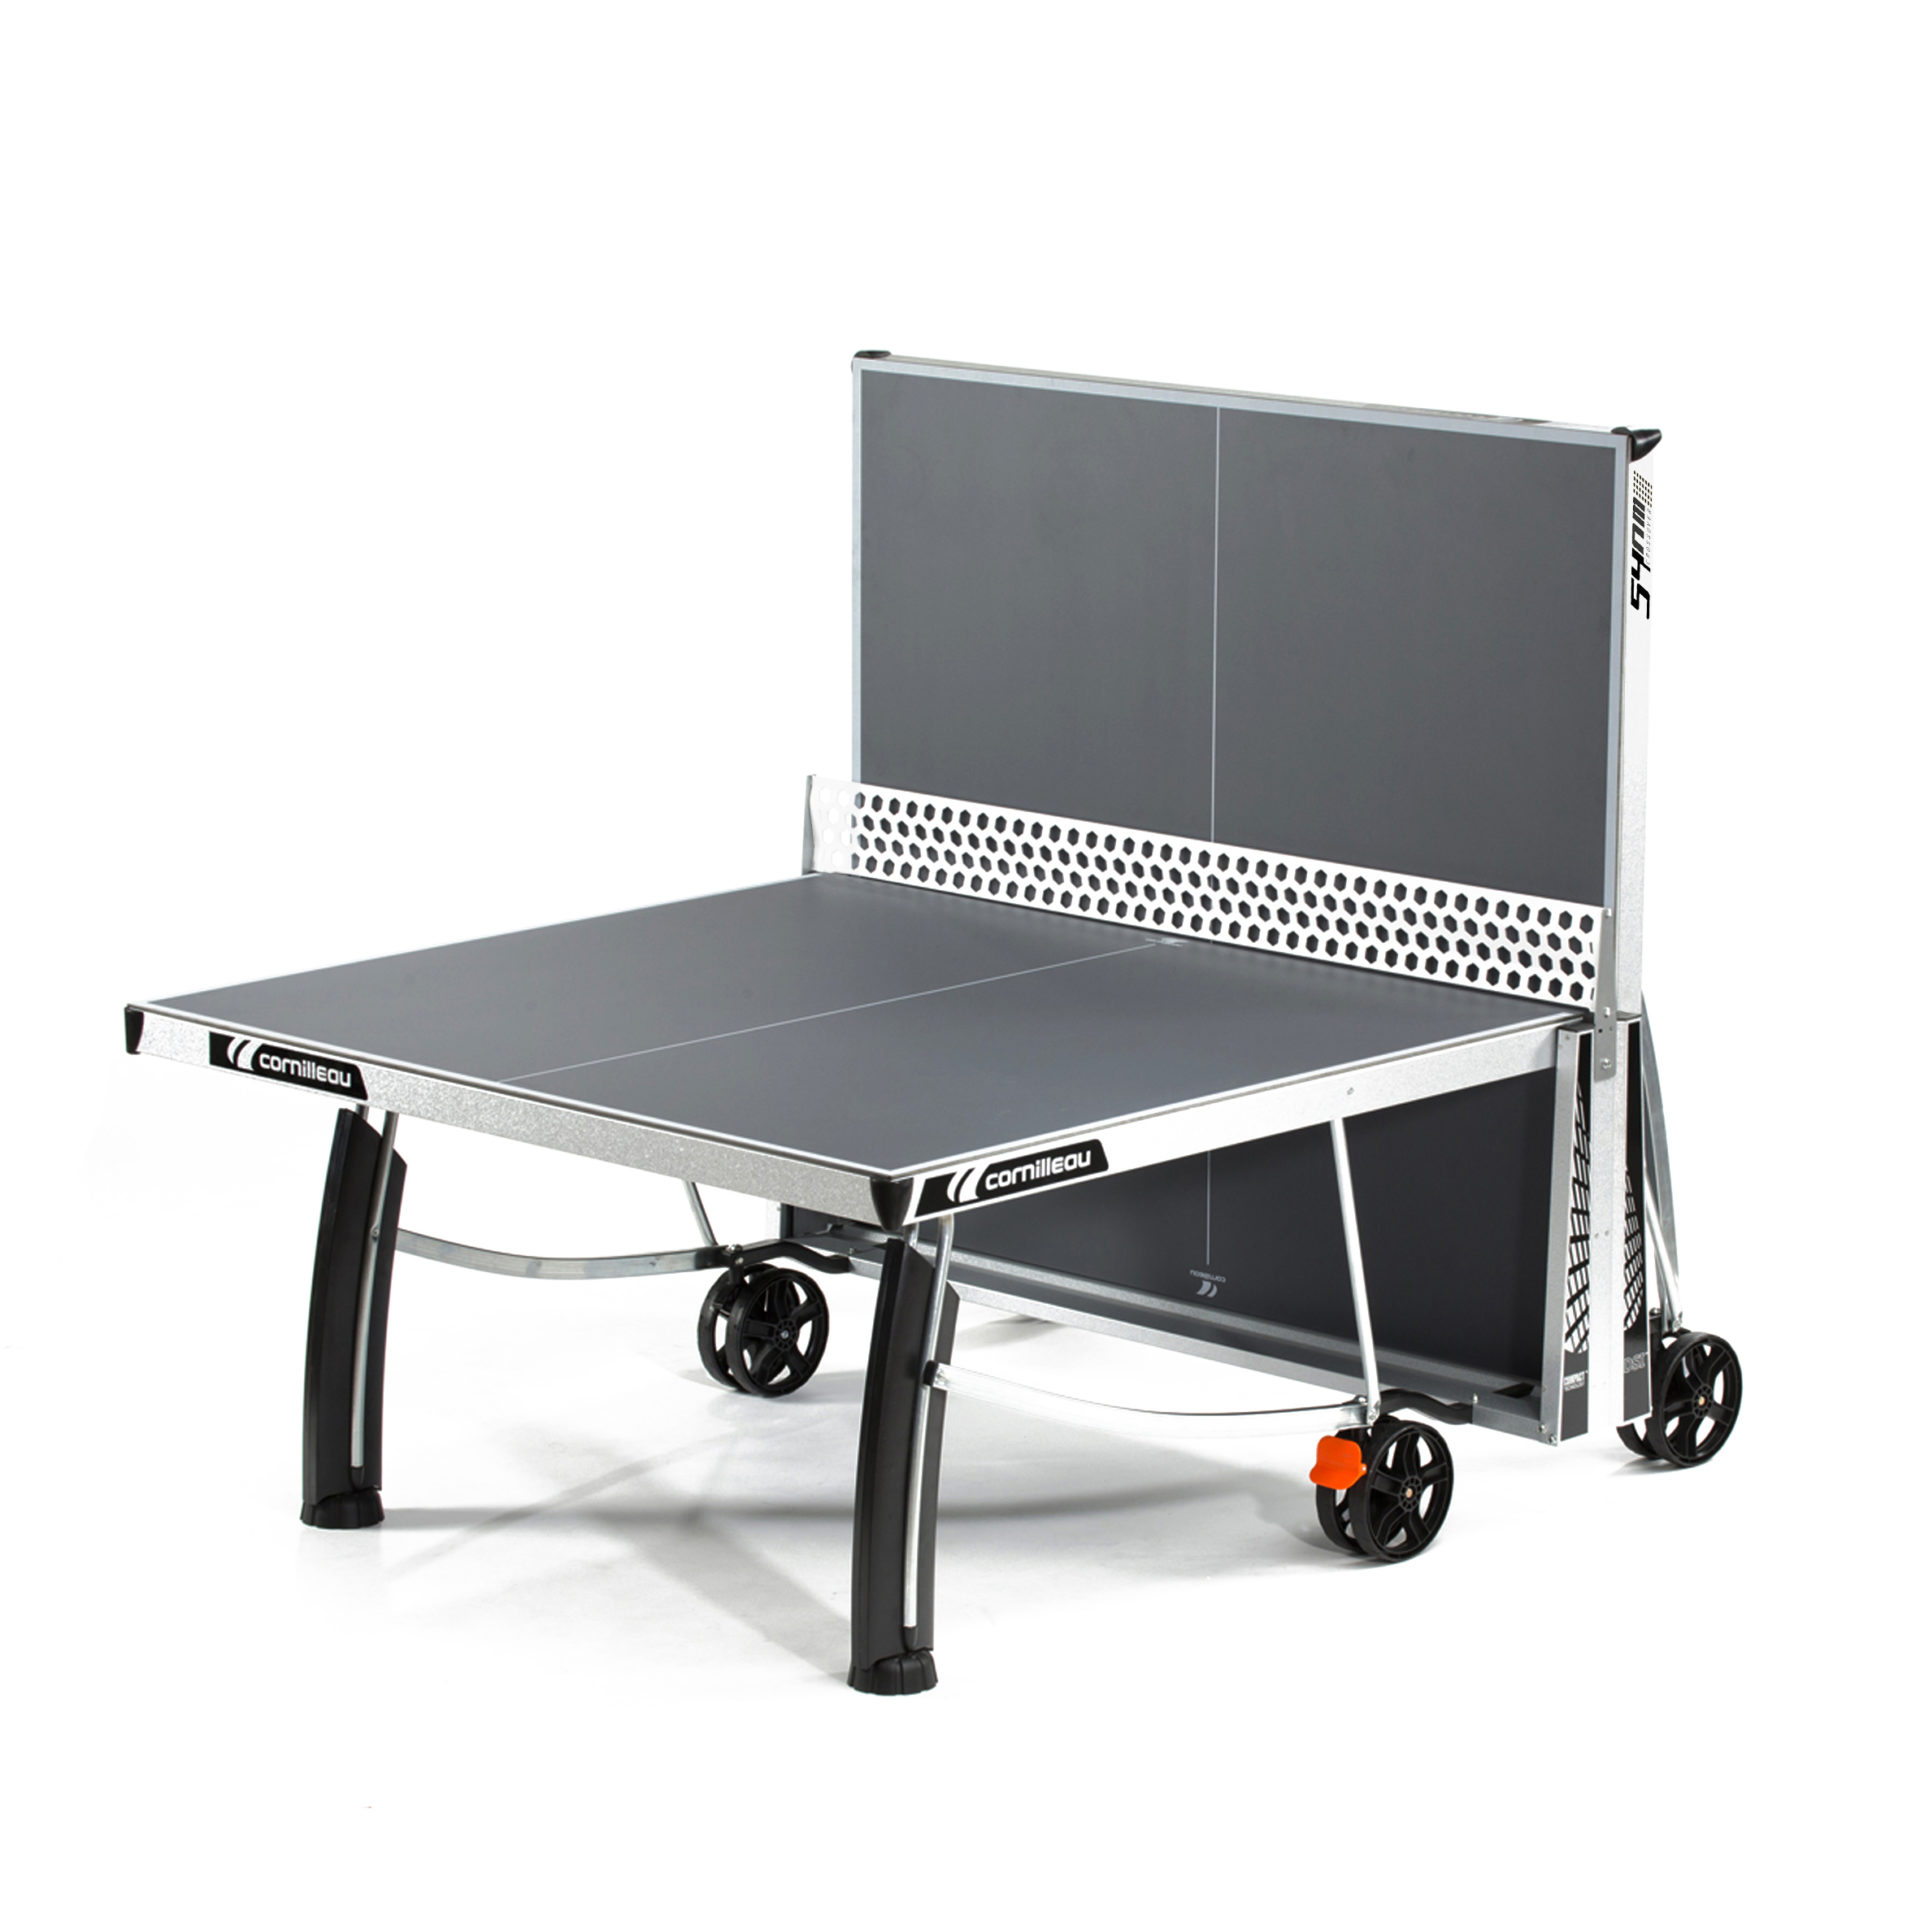 Dan hypothese Verenigen Cornilleau 540M Outdoor Ping Pong Table | Imagine That Pool Tables